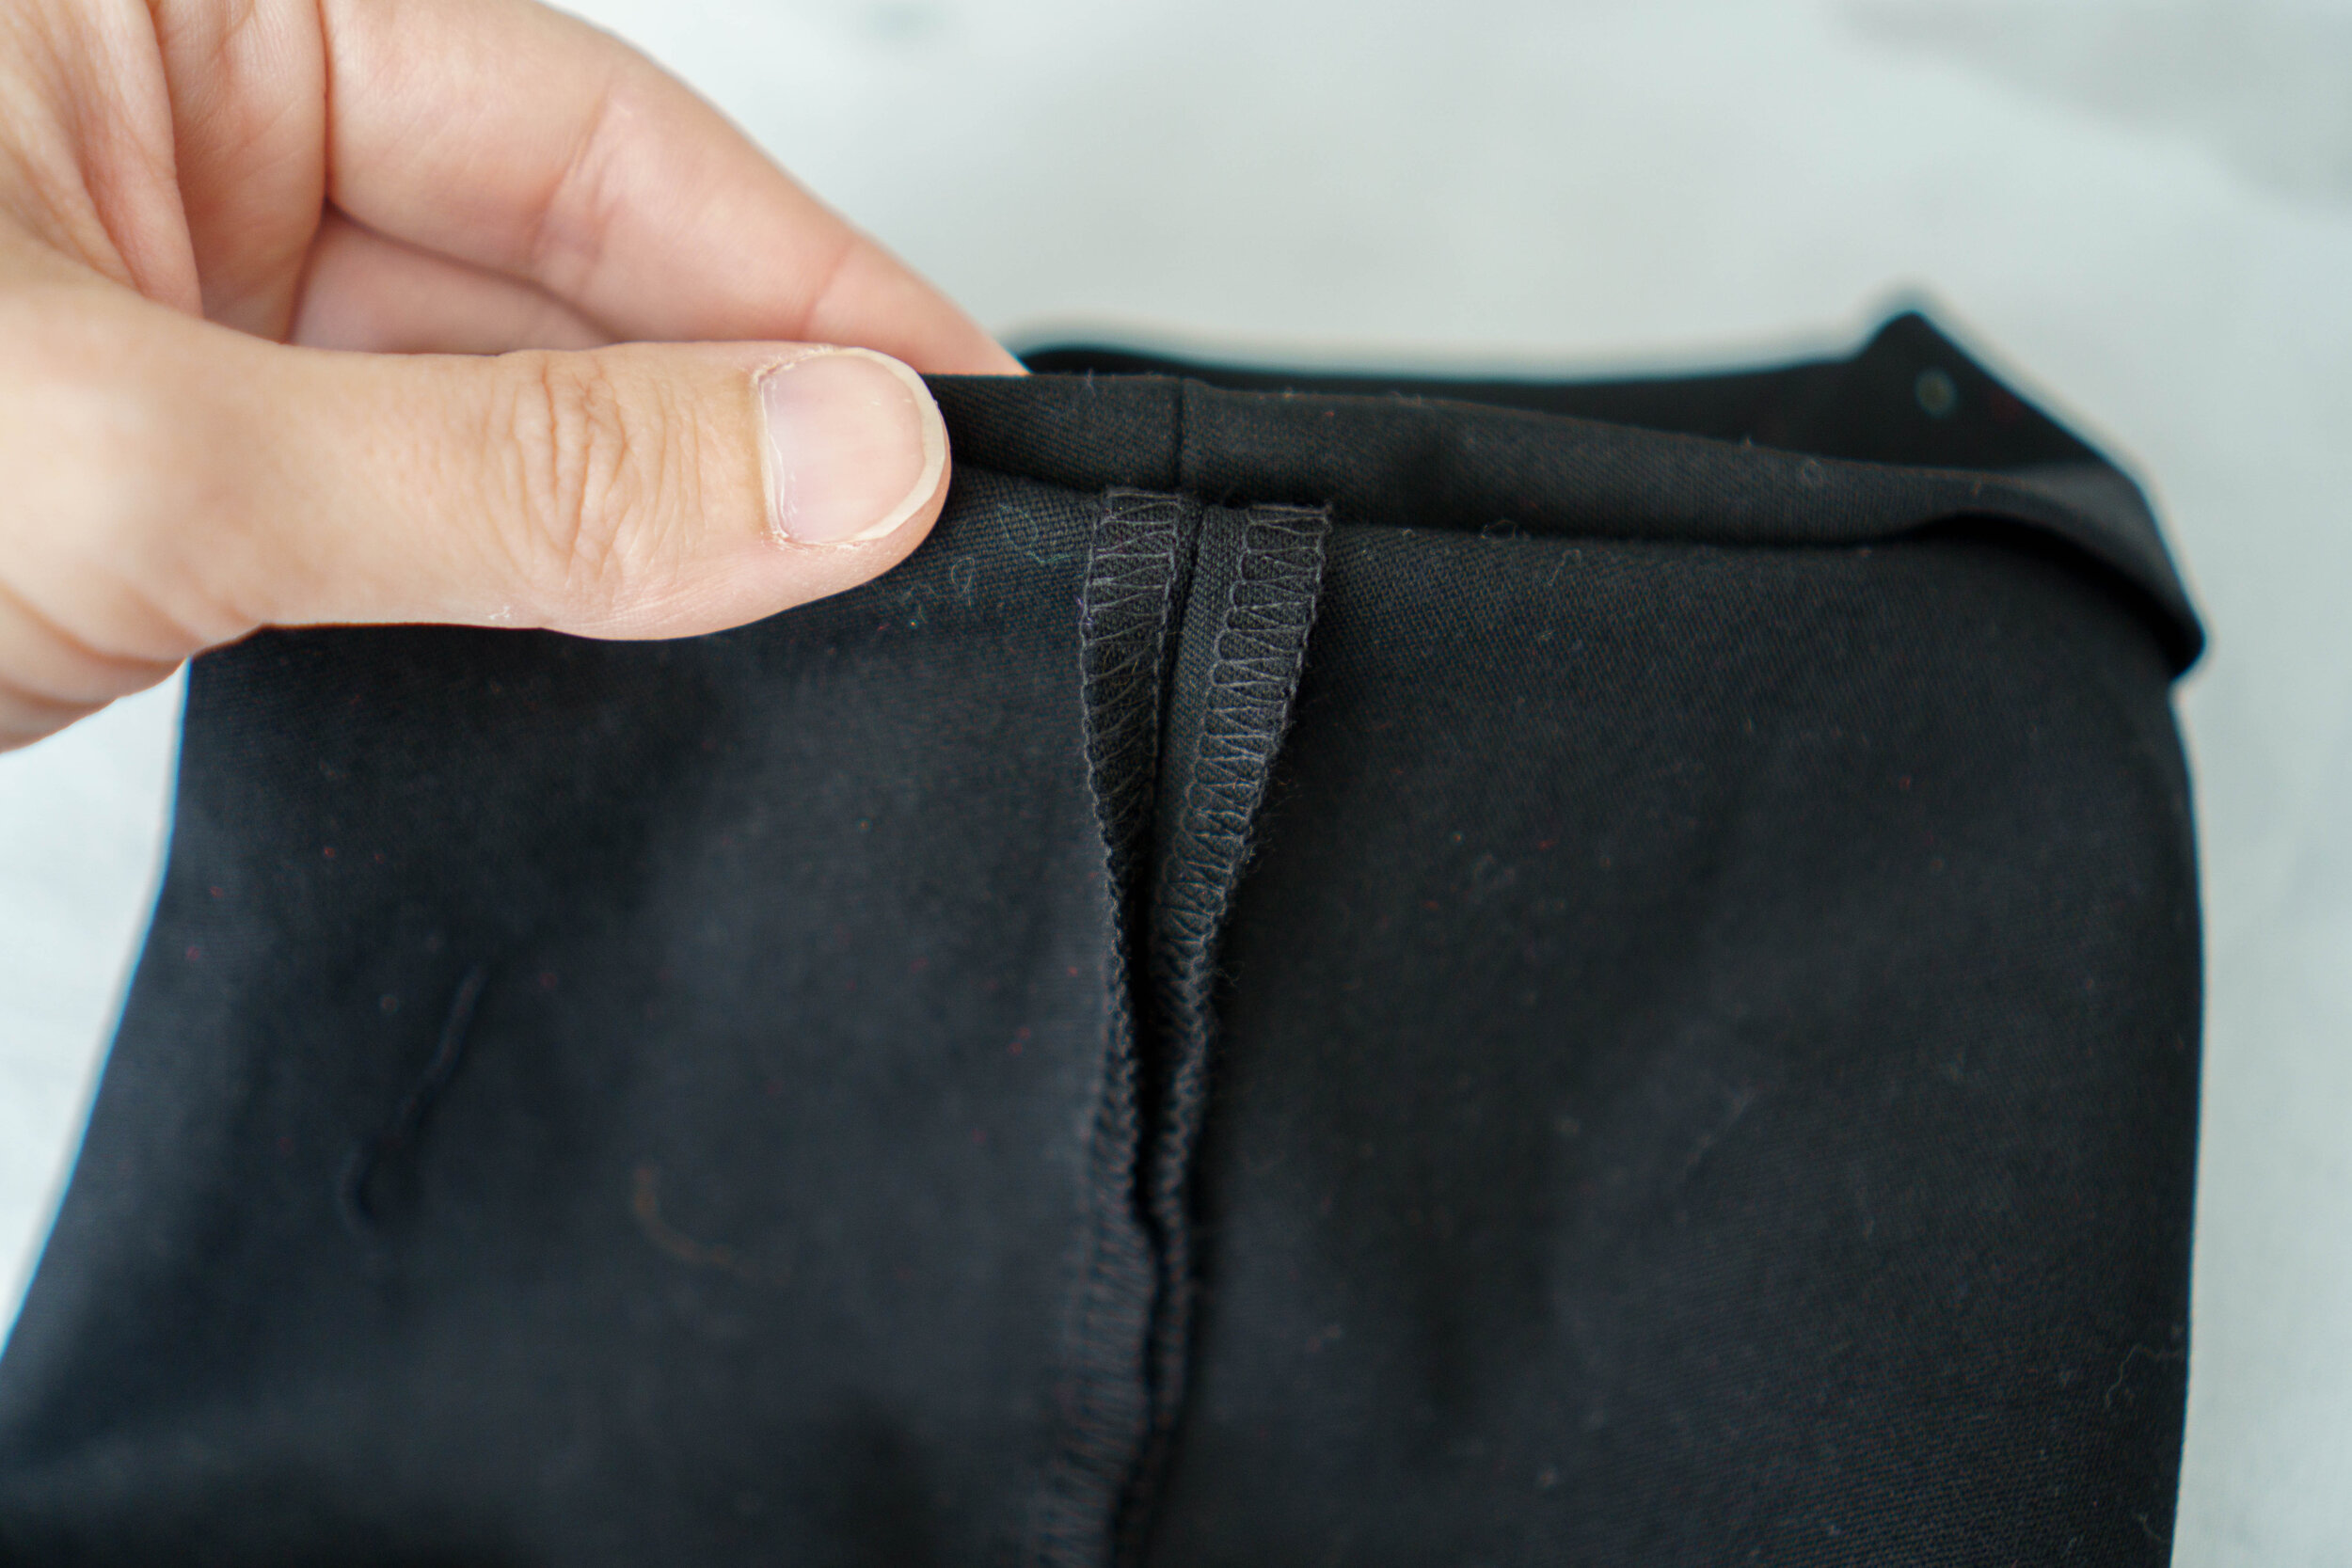 How to Hem Pants Without a Sewing Machine - Hem Dress Pants by Hand